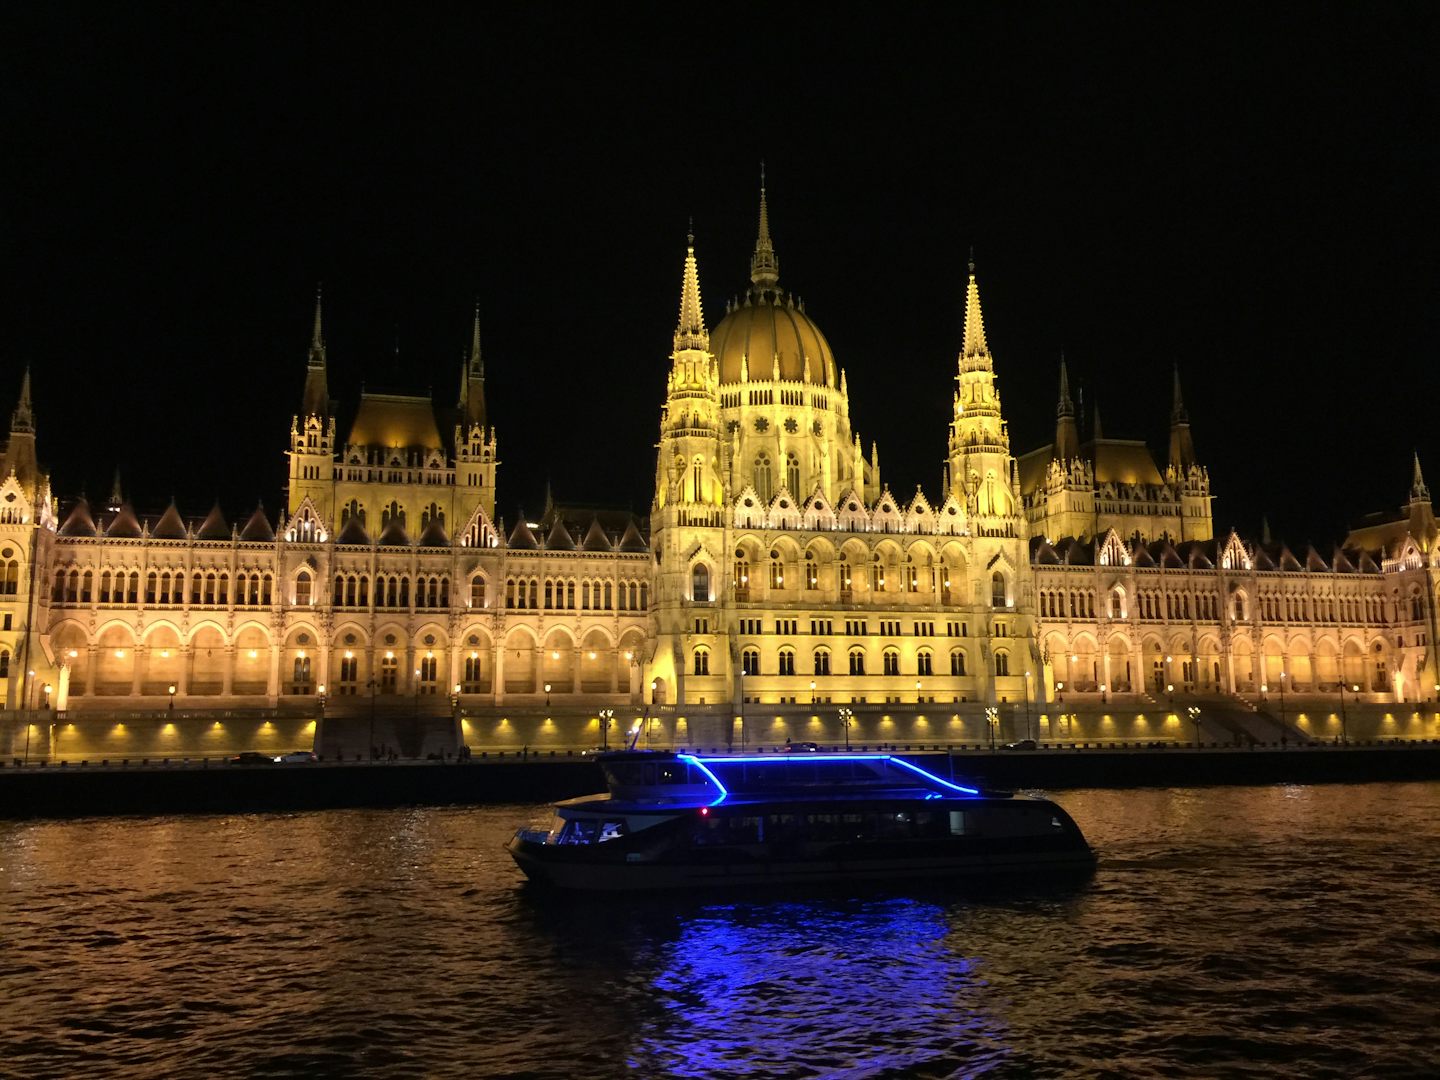 The Parliment on the Pest side of the river during our moonlight cruise of the harbor.